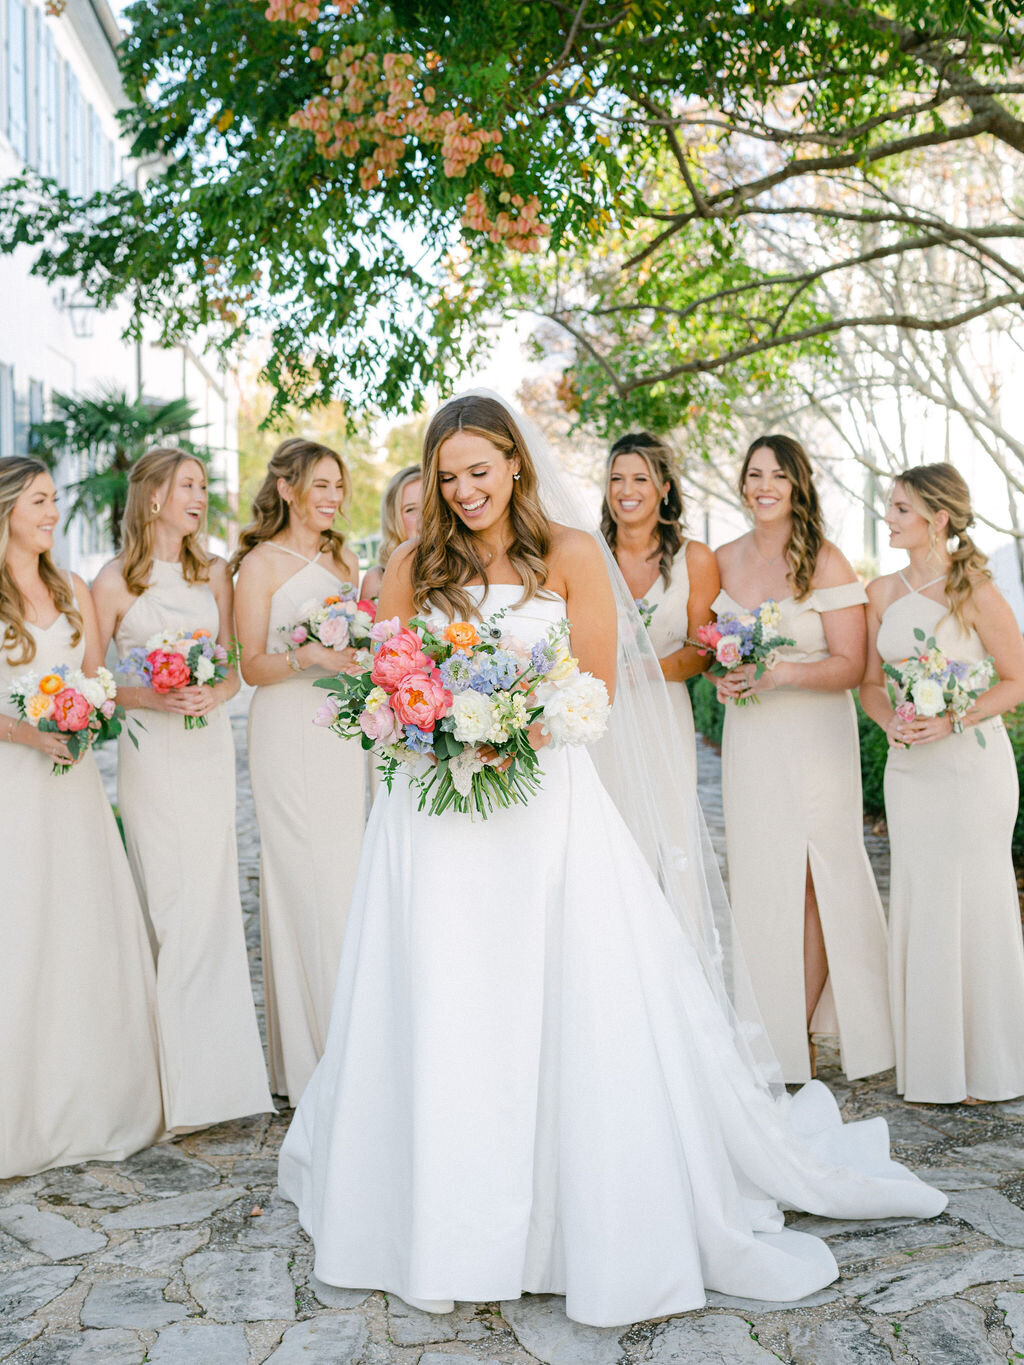 Bride with bridesmaids holding colorful bouquets for Alys Beach wedding